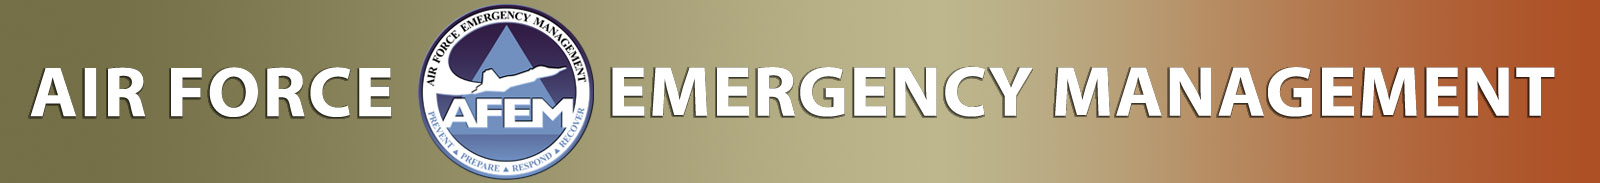 Air Force Emergency Management Banner